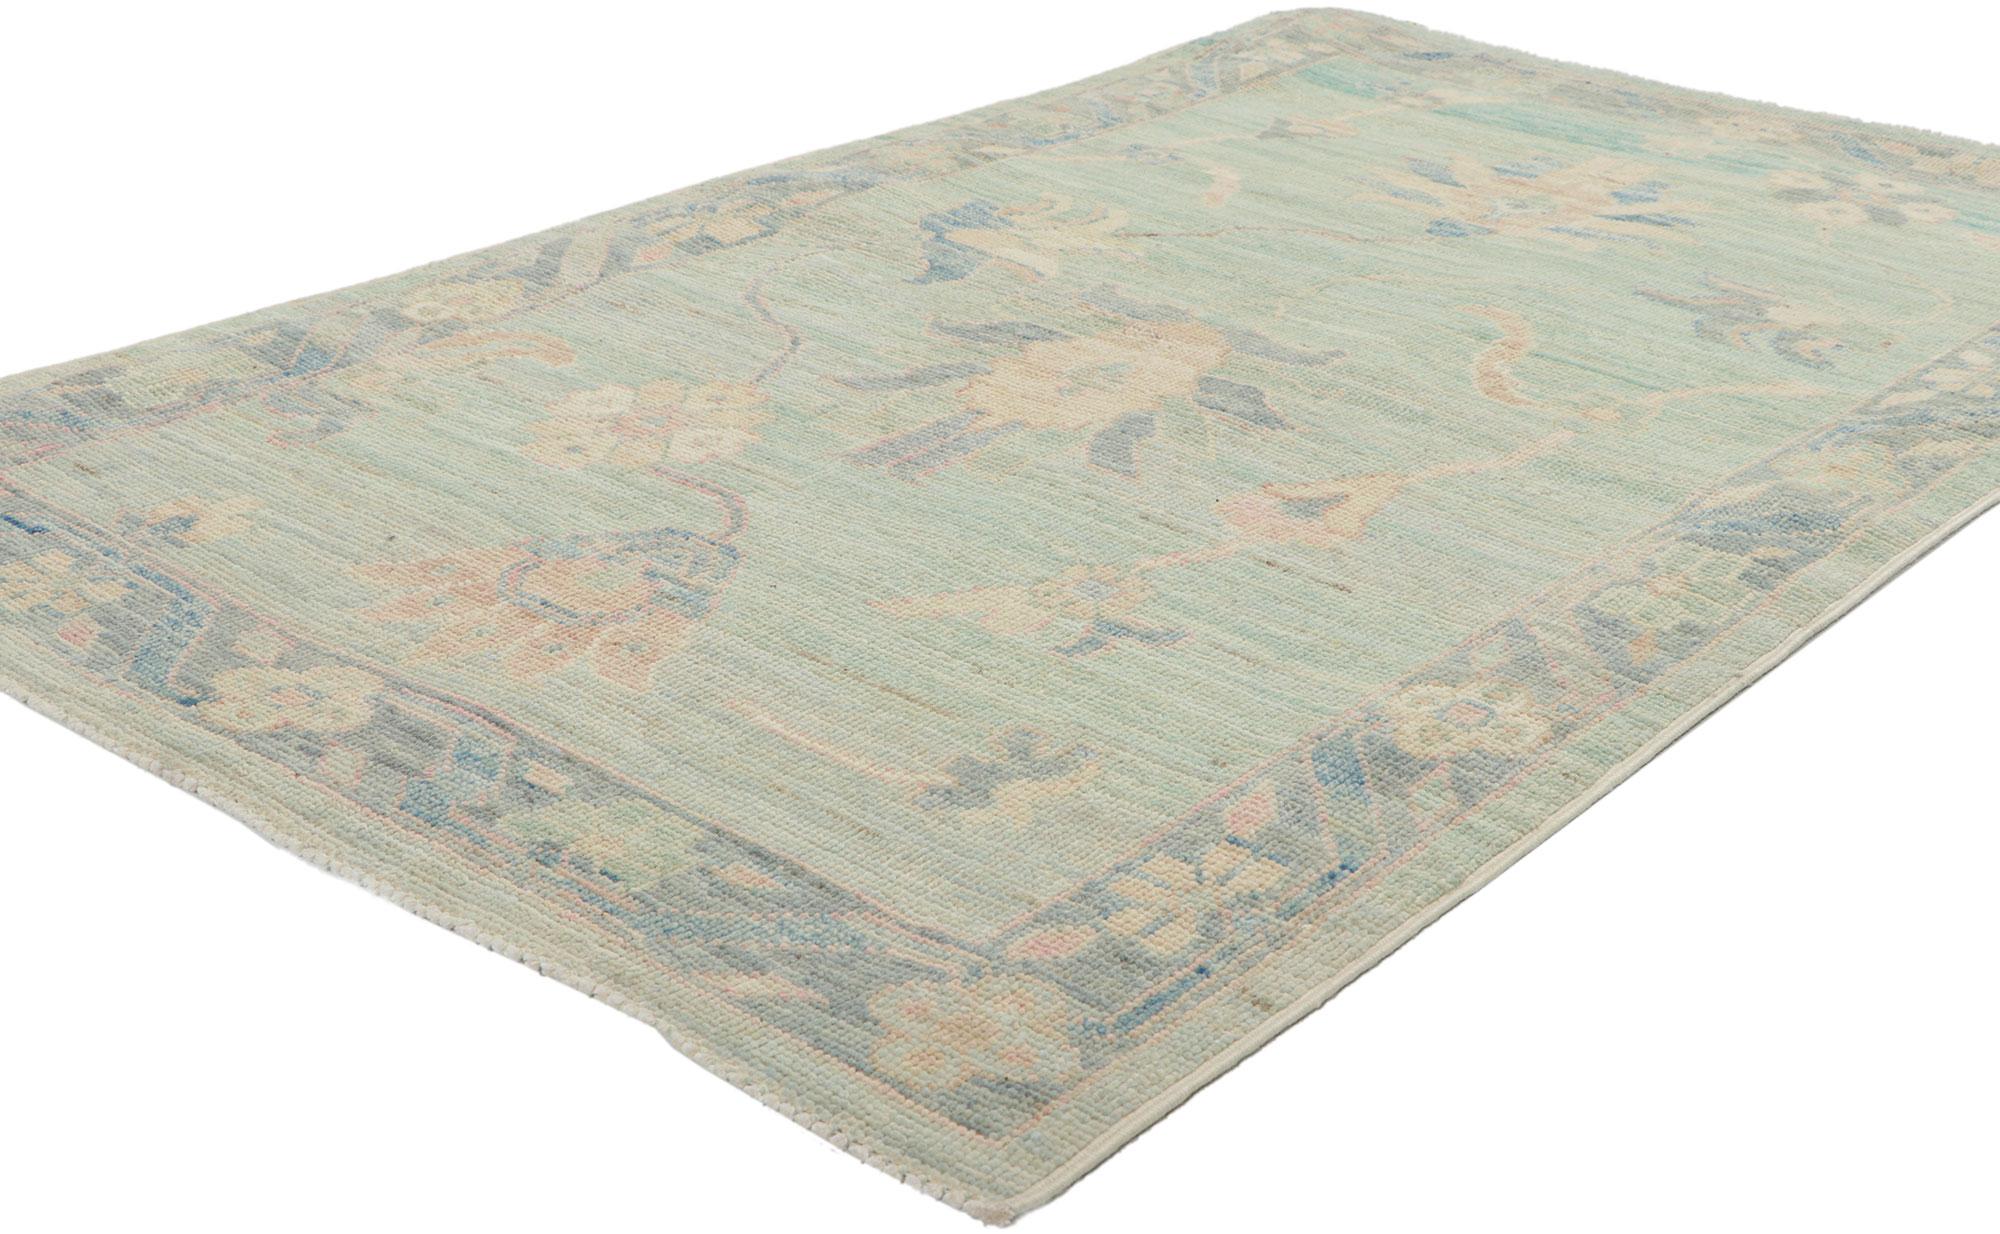 80844 New Modern Style Oushak rug with Soft Colors, 03'00 x 04'11. Polished and playful, this hand-knotted wool contemporary Contemporary Oushak rug beautifully embodies a modern style. The composition features an all-over botanical pattern composed